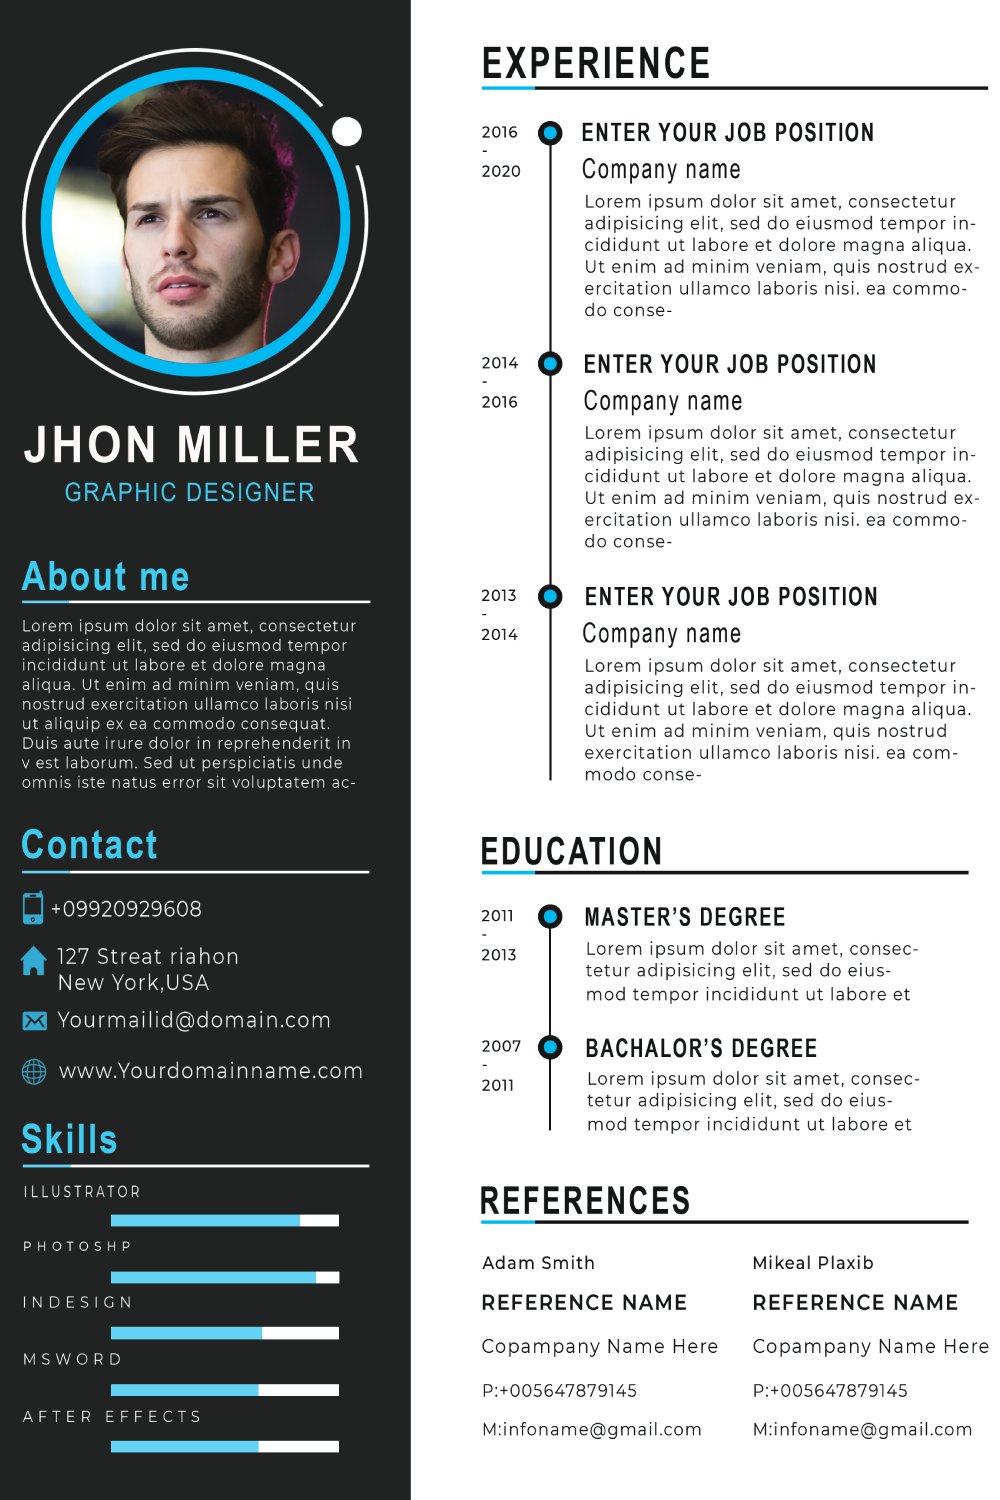 Professional resume with a blue and black color scheme.